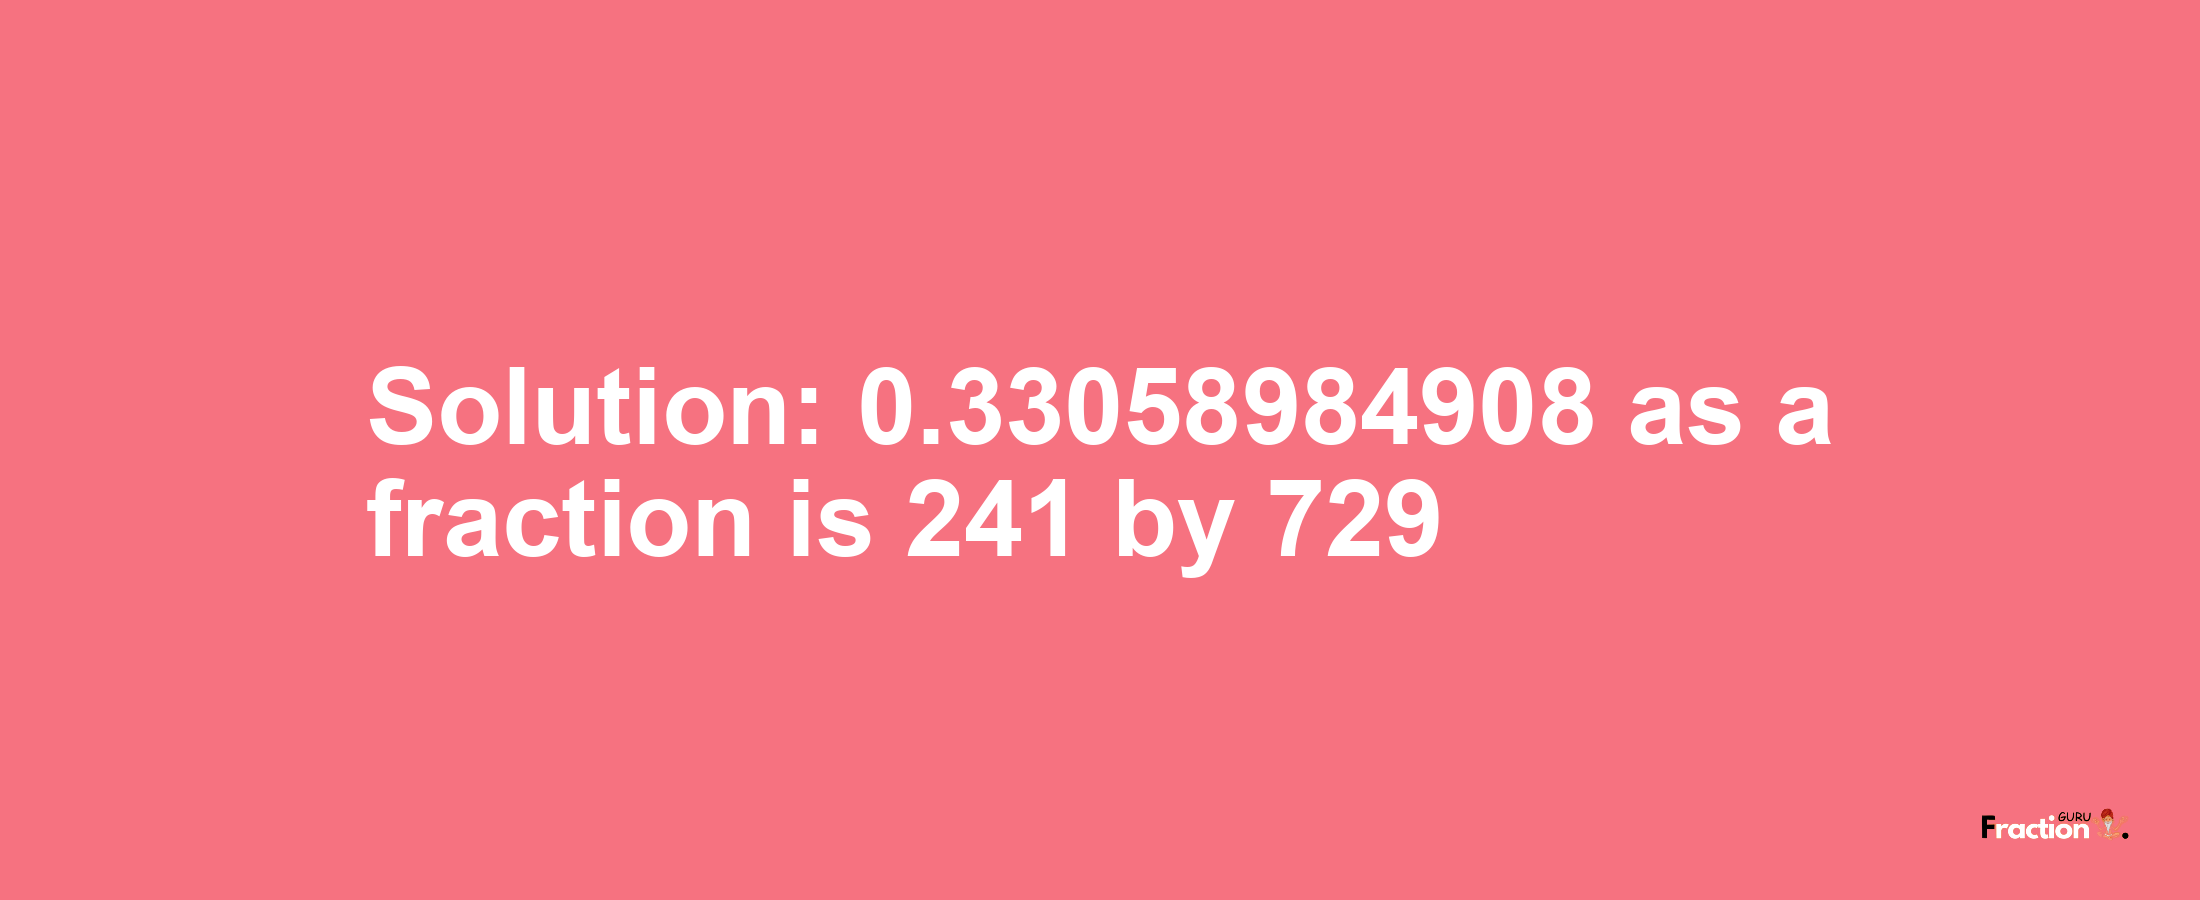 Solution:0.33058984908 as a fraction is 241/729